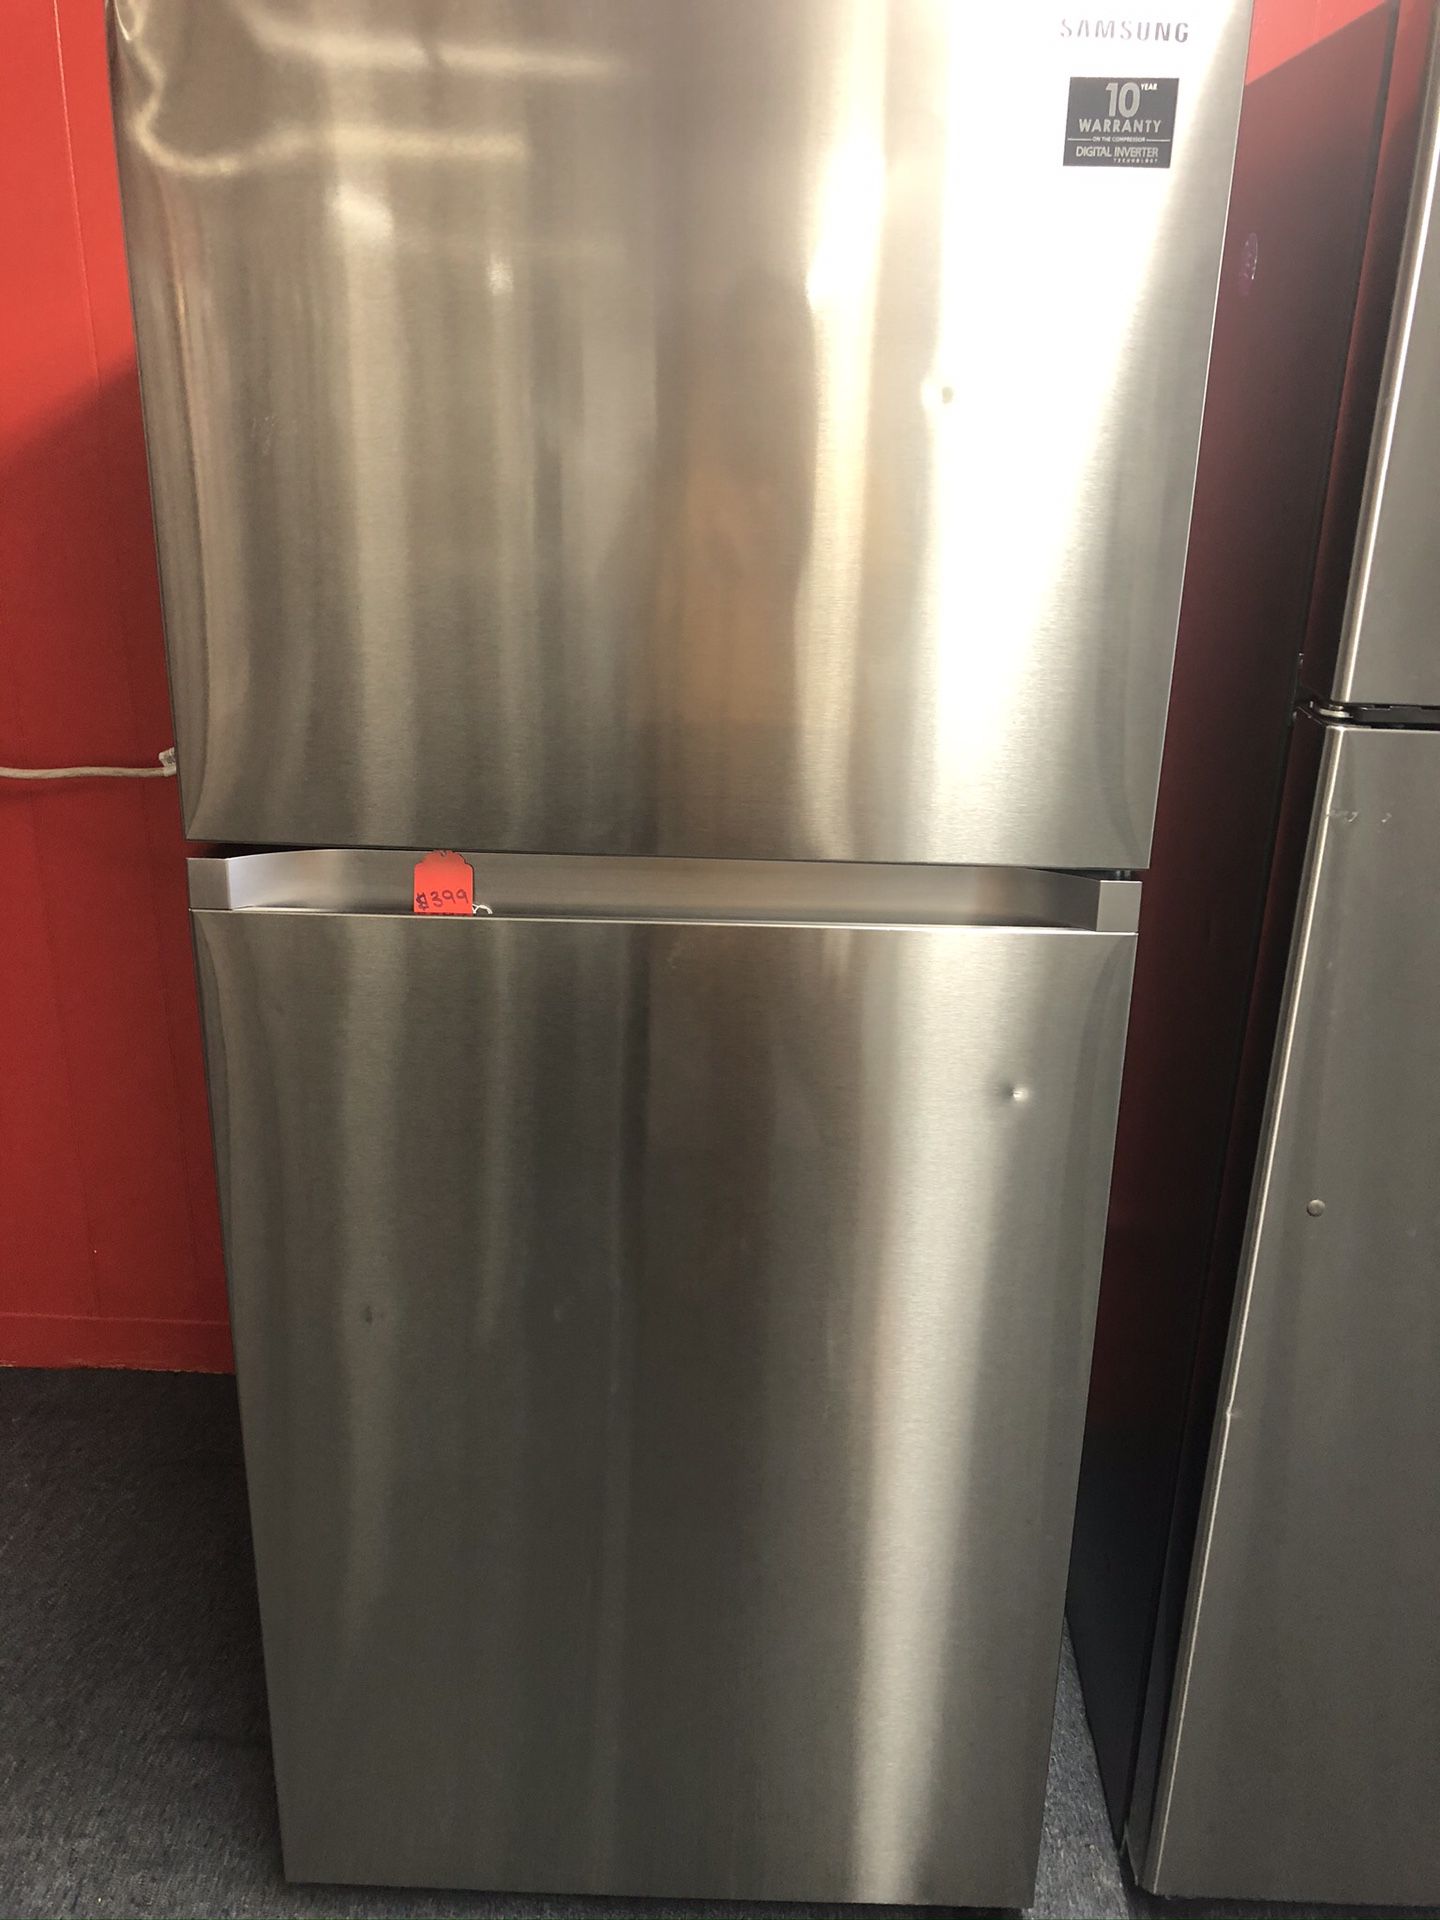 New scratch and dent Samsung 16 cu ft top and bottom fridge. 1 year warranty